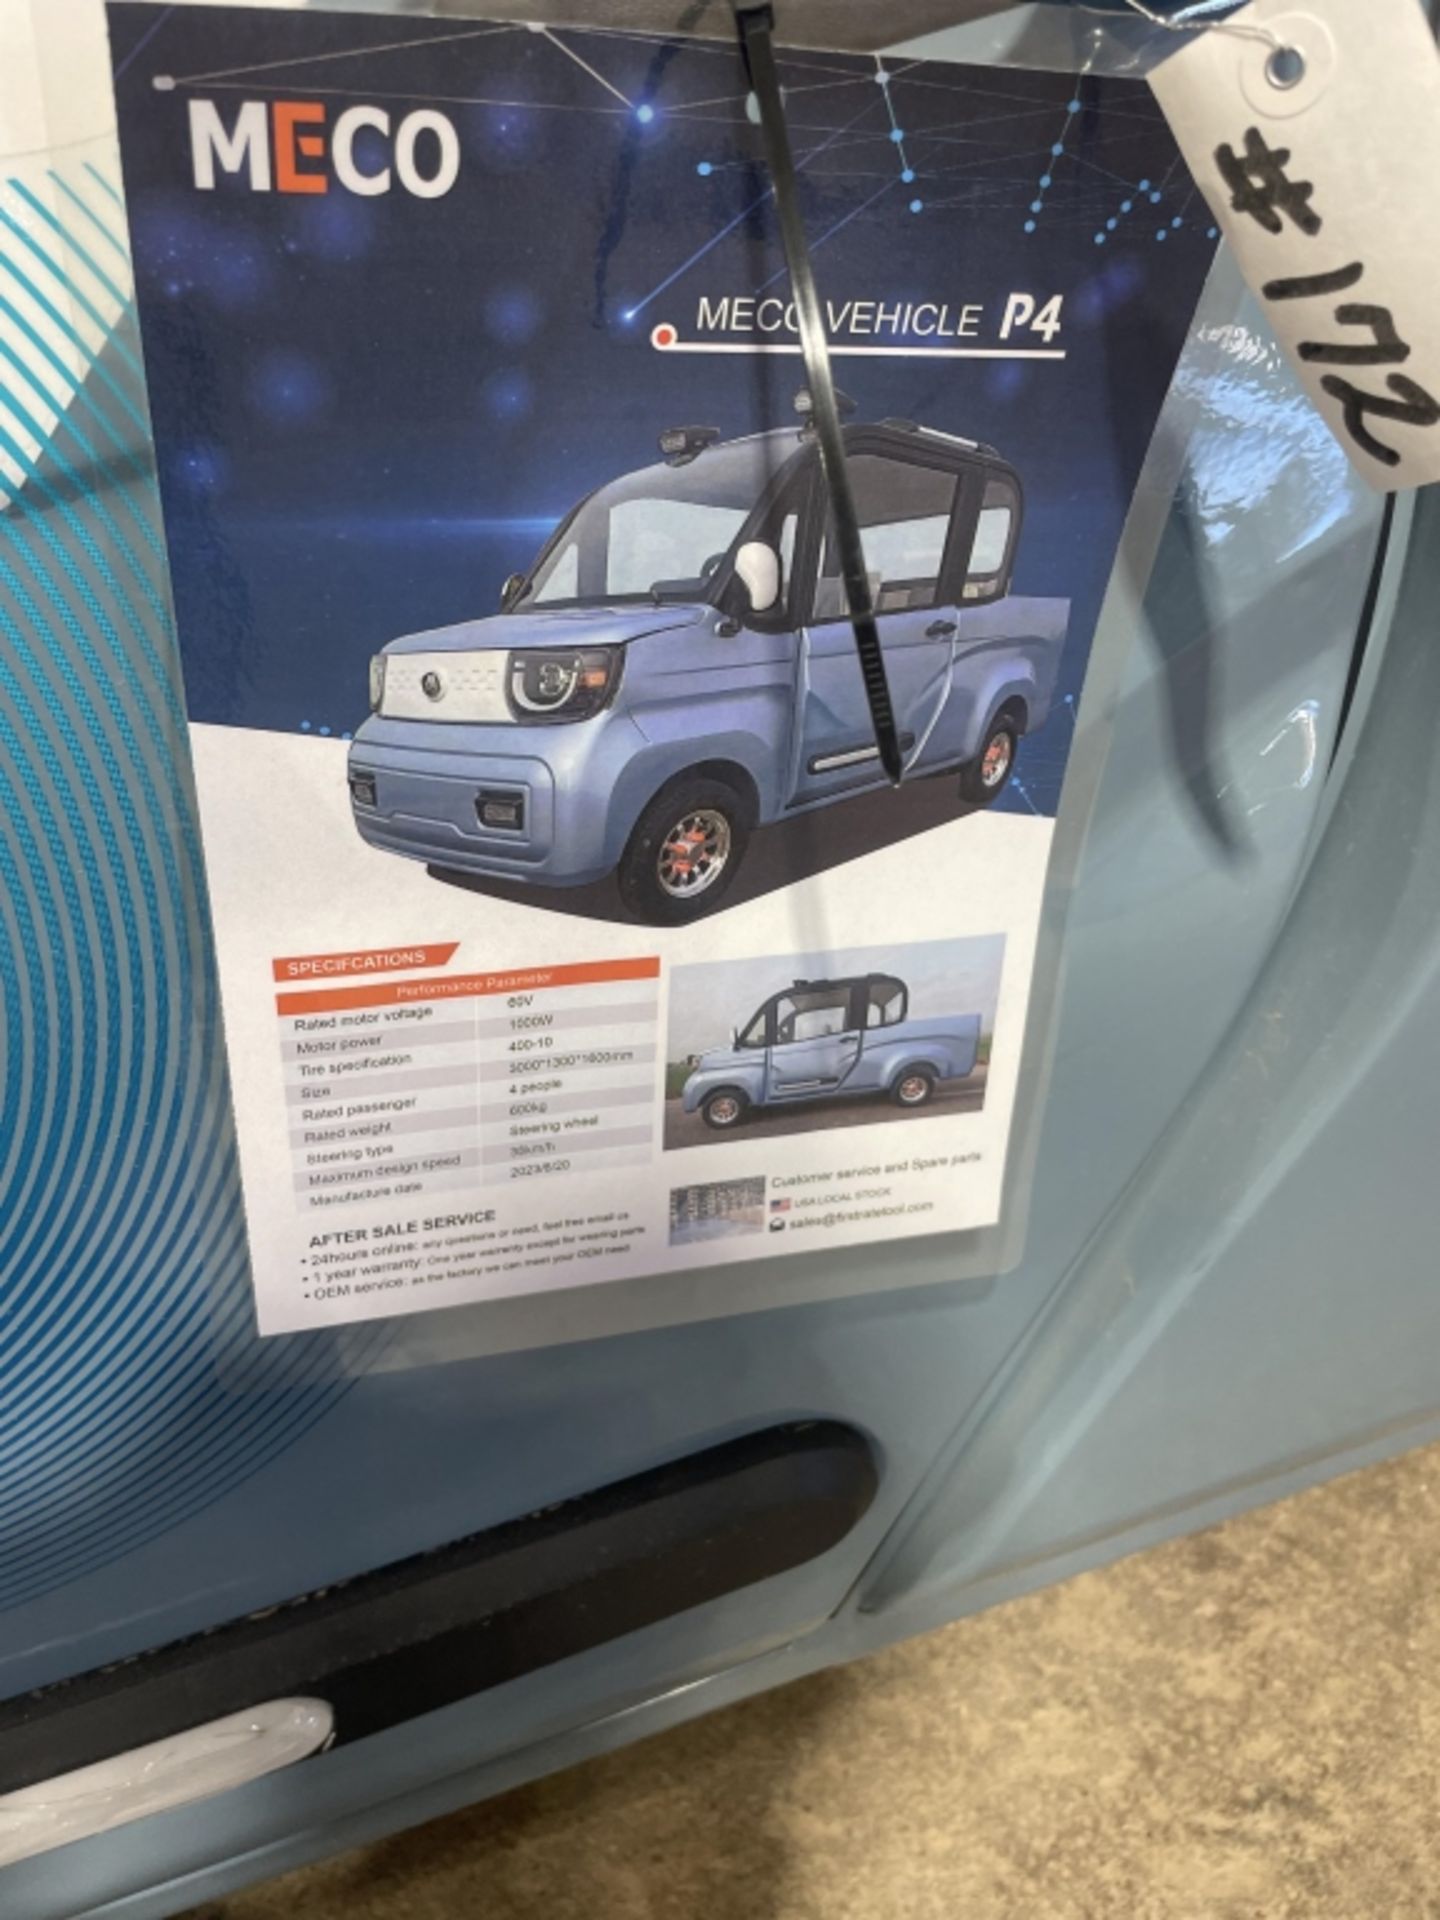 MECO P4 Electric Vehicle - Image 17 of 25